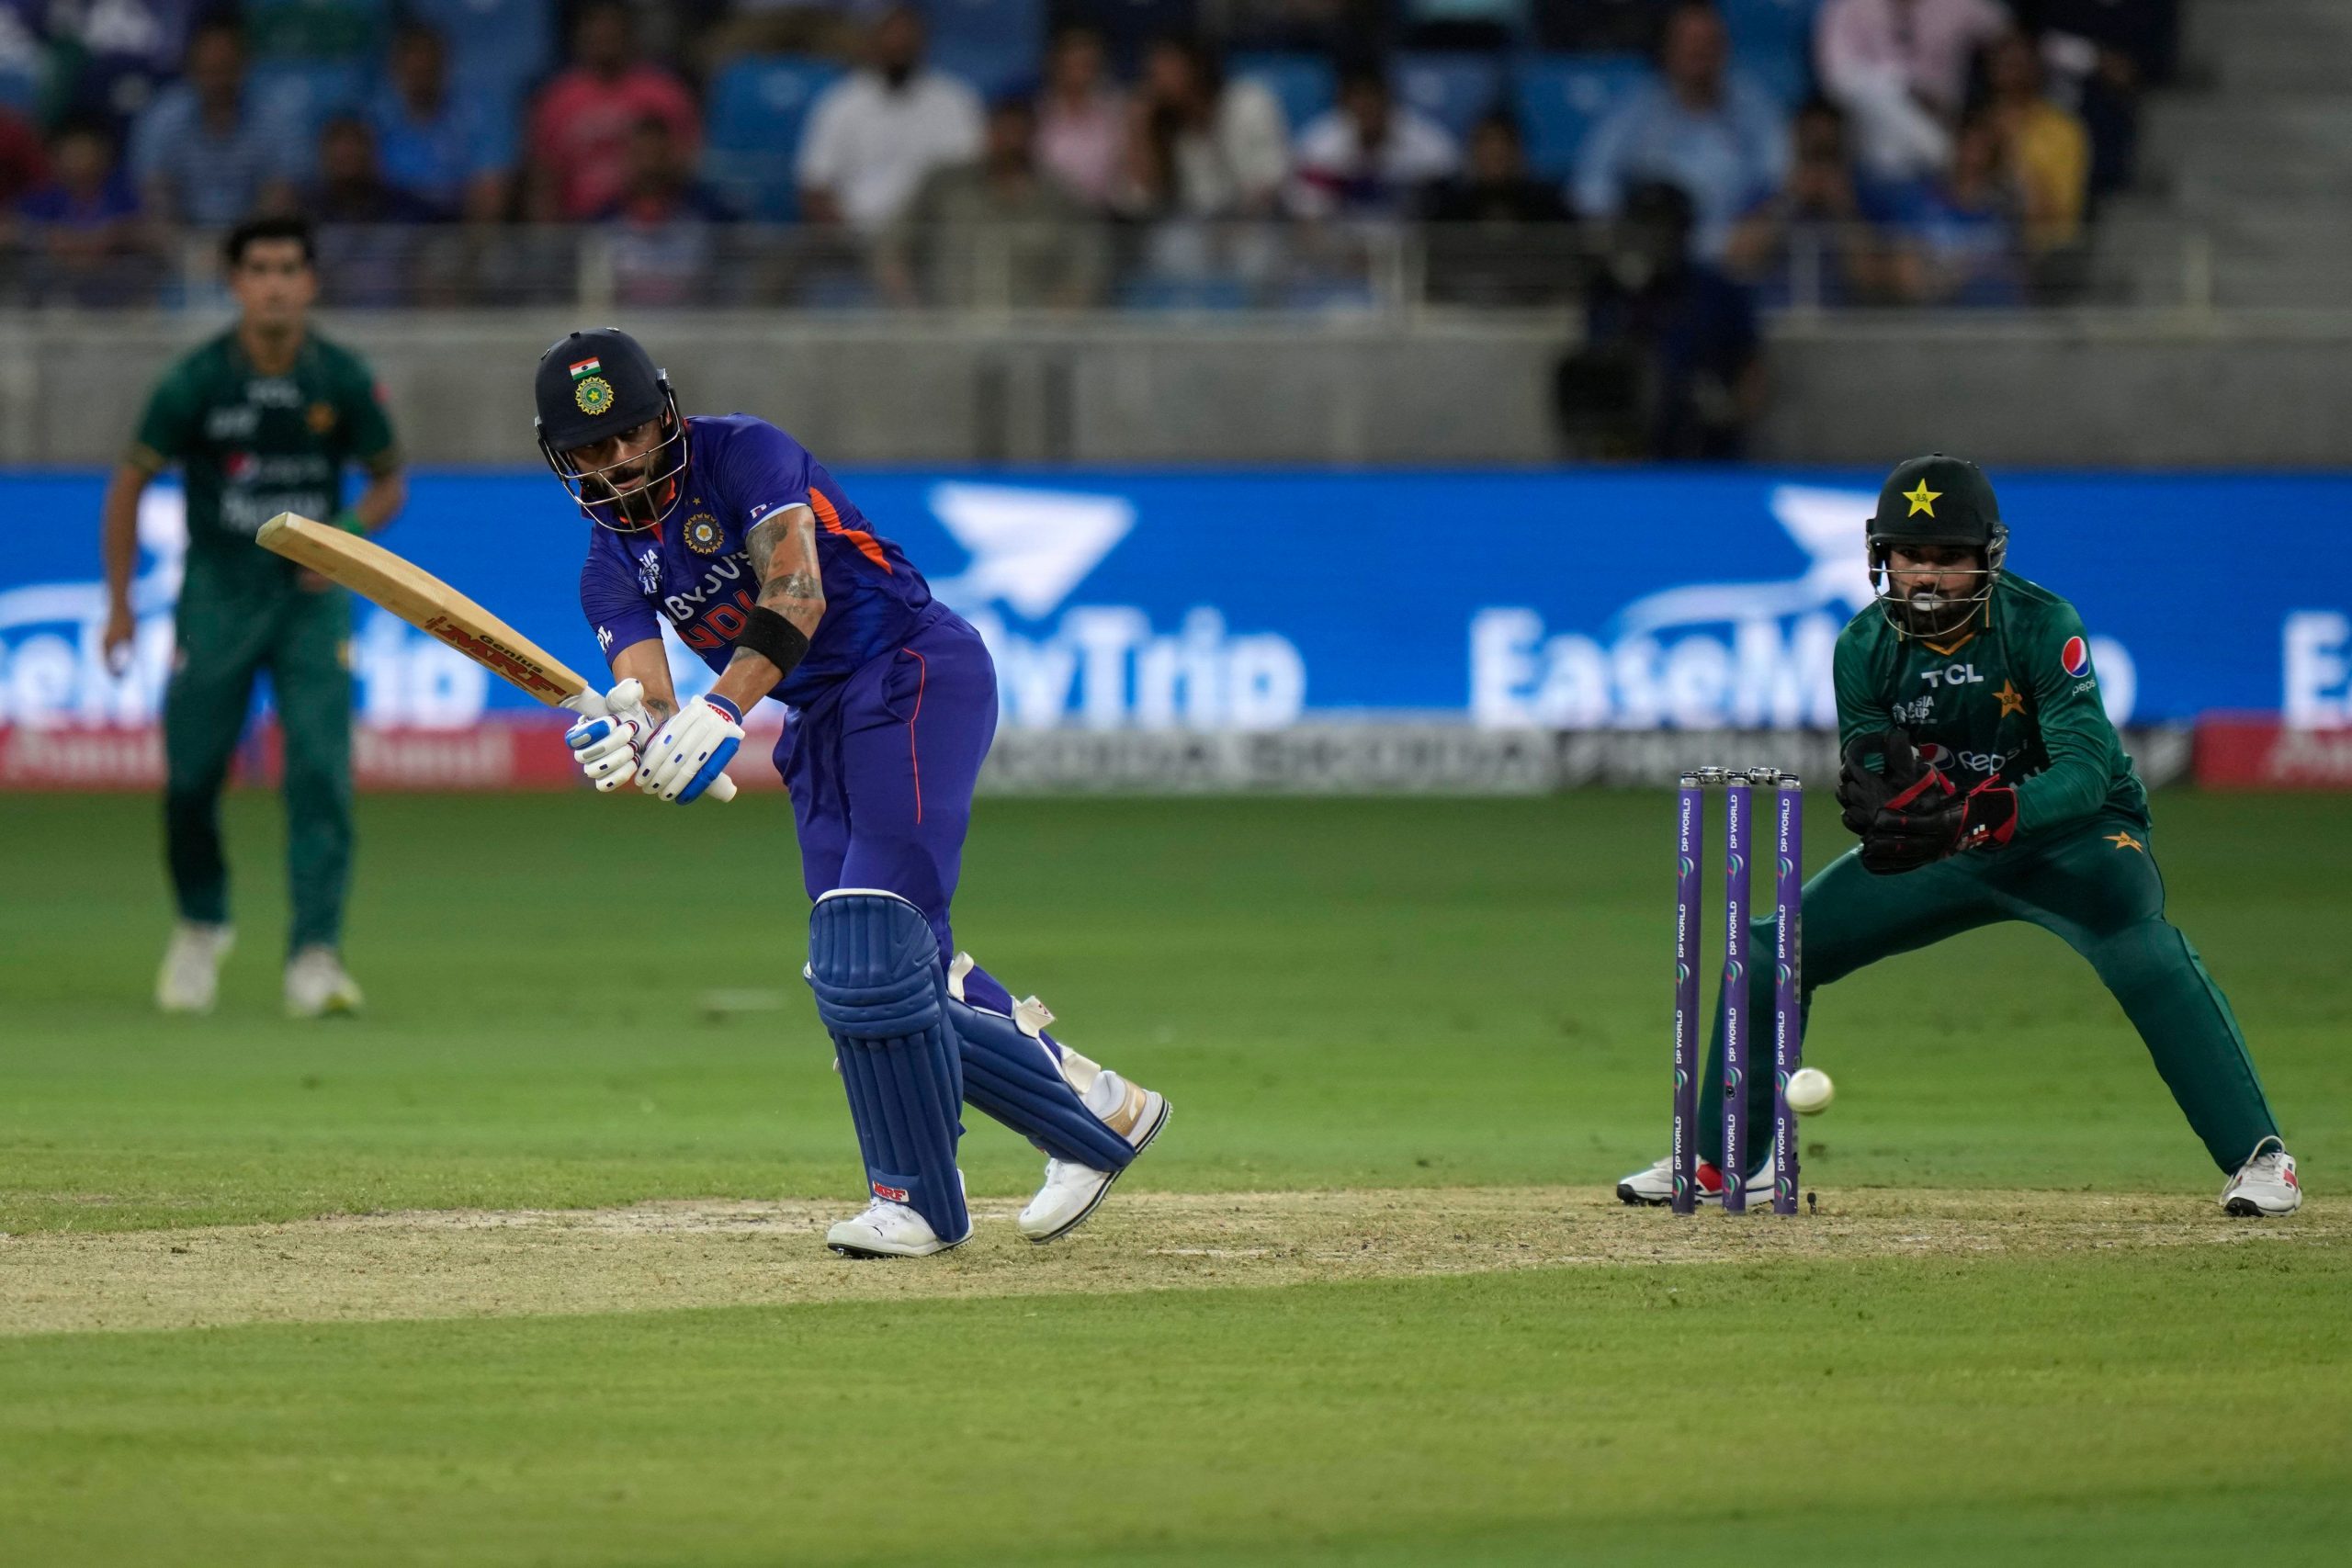 King is back: Kohli anchors innings vs Pakistan, leads Asia Cup 2022 charts